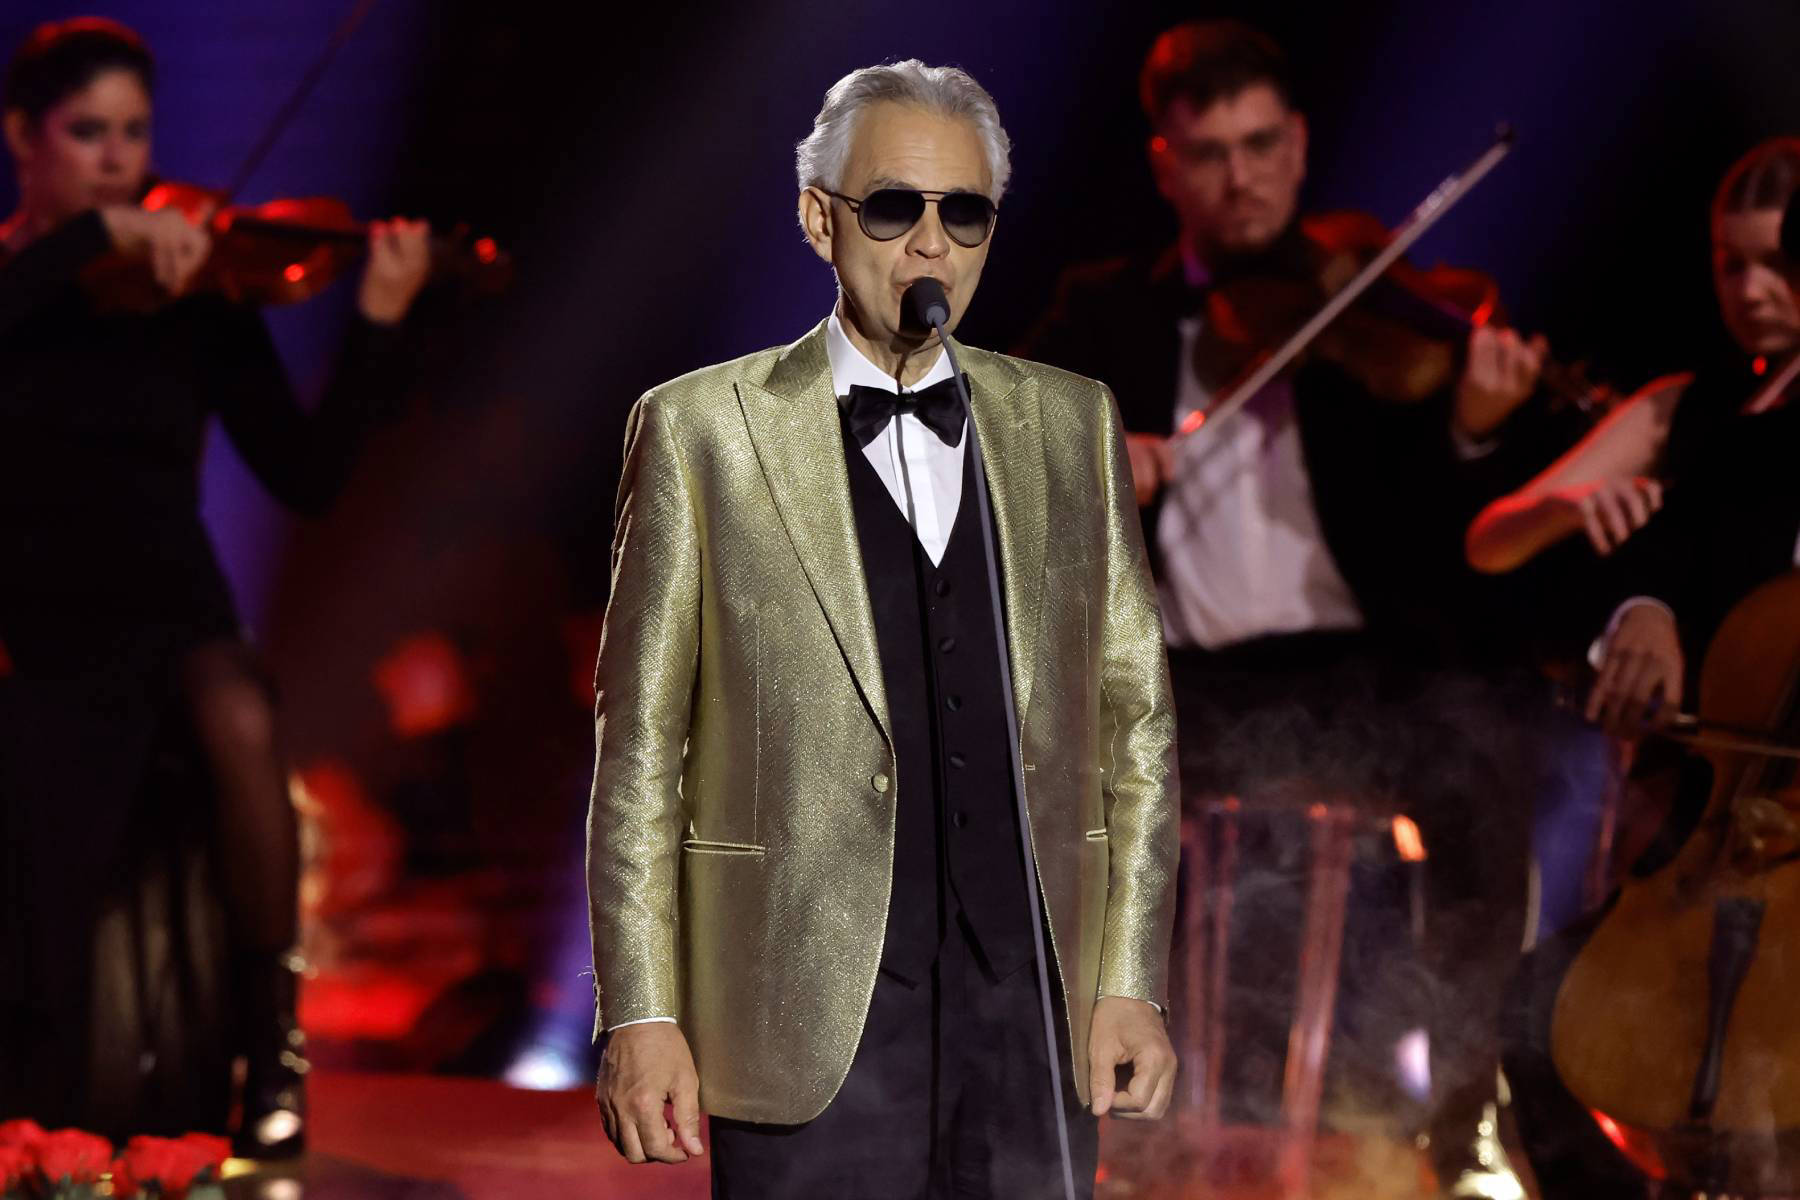 Andrea Bocelli's Performance of ‘Granada' Earns a Standing Ovation at